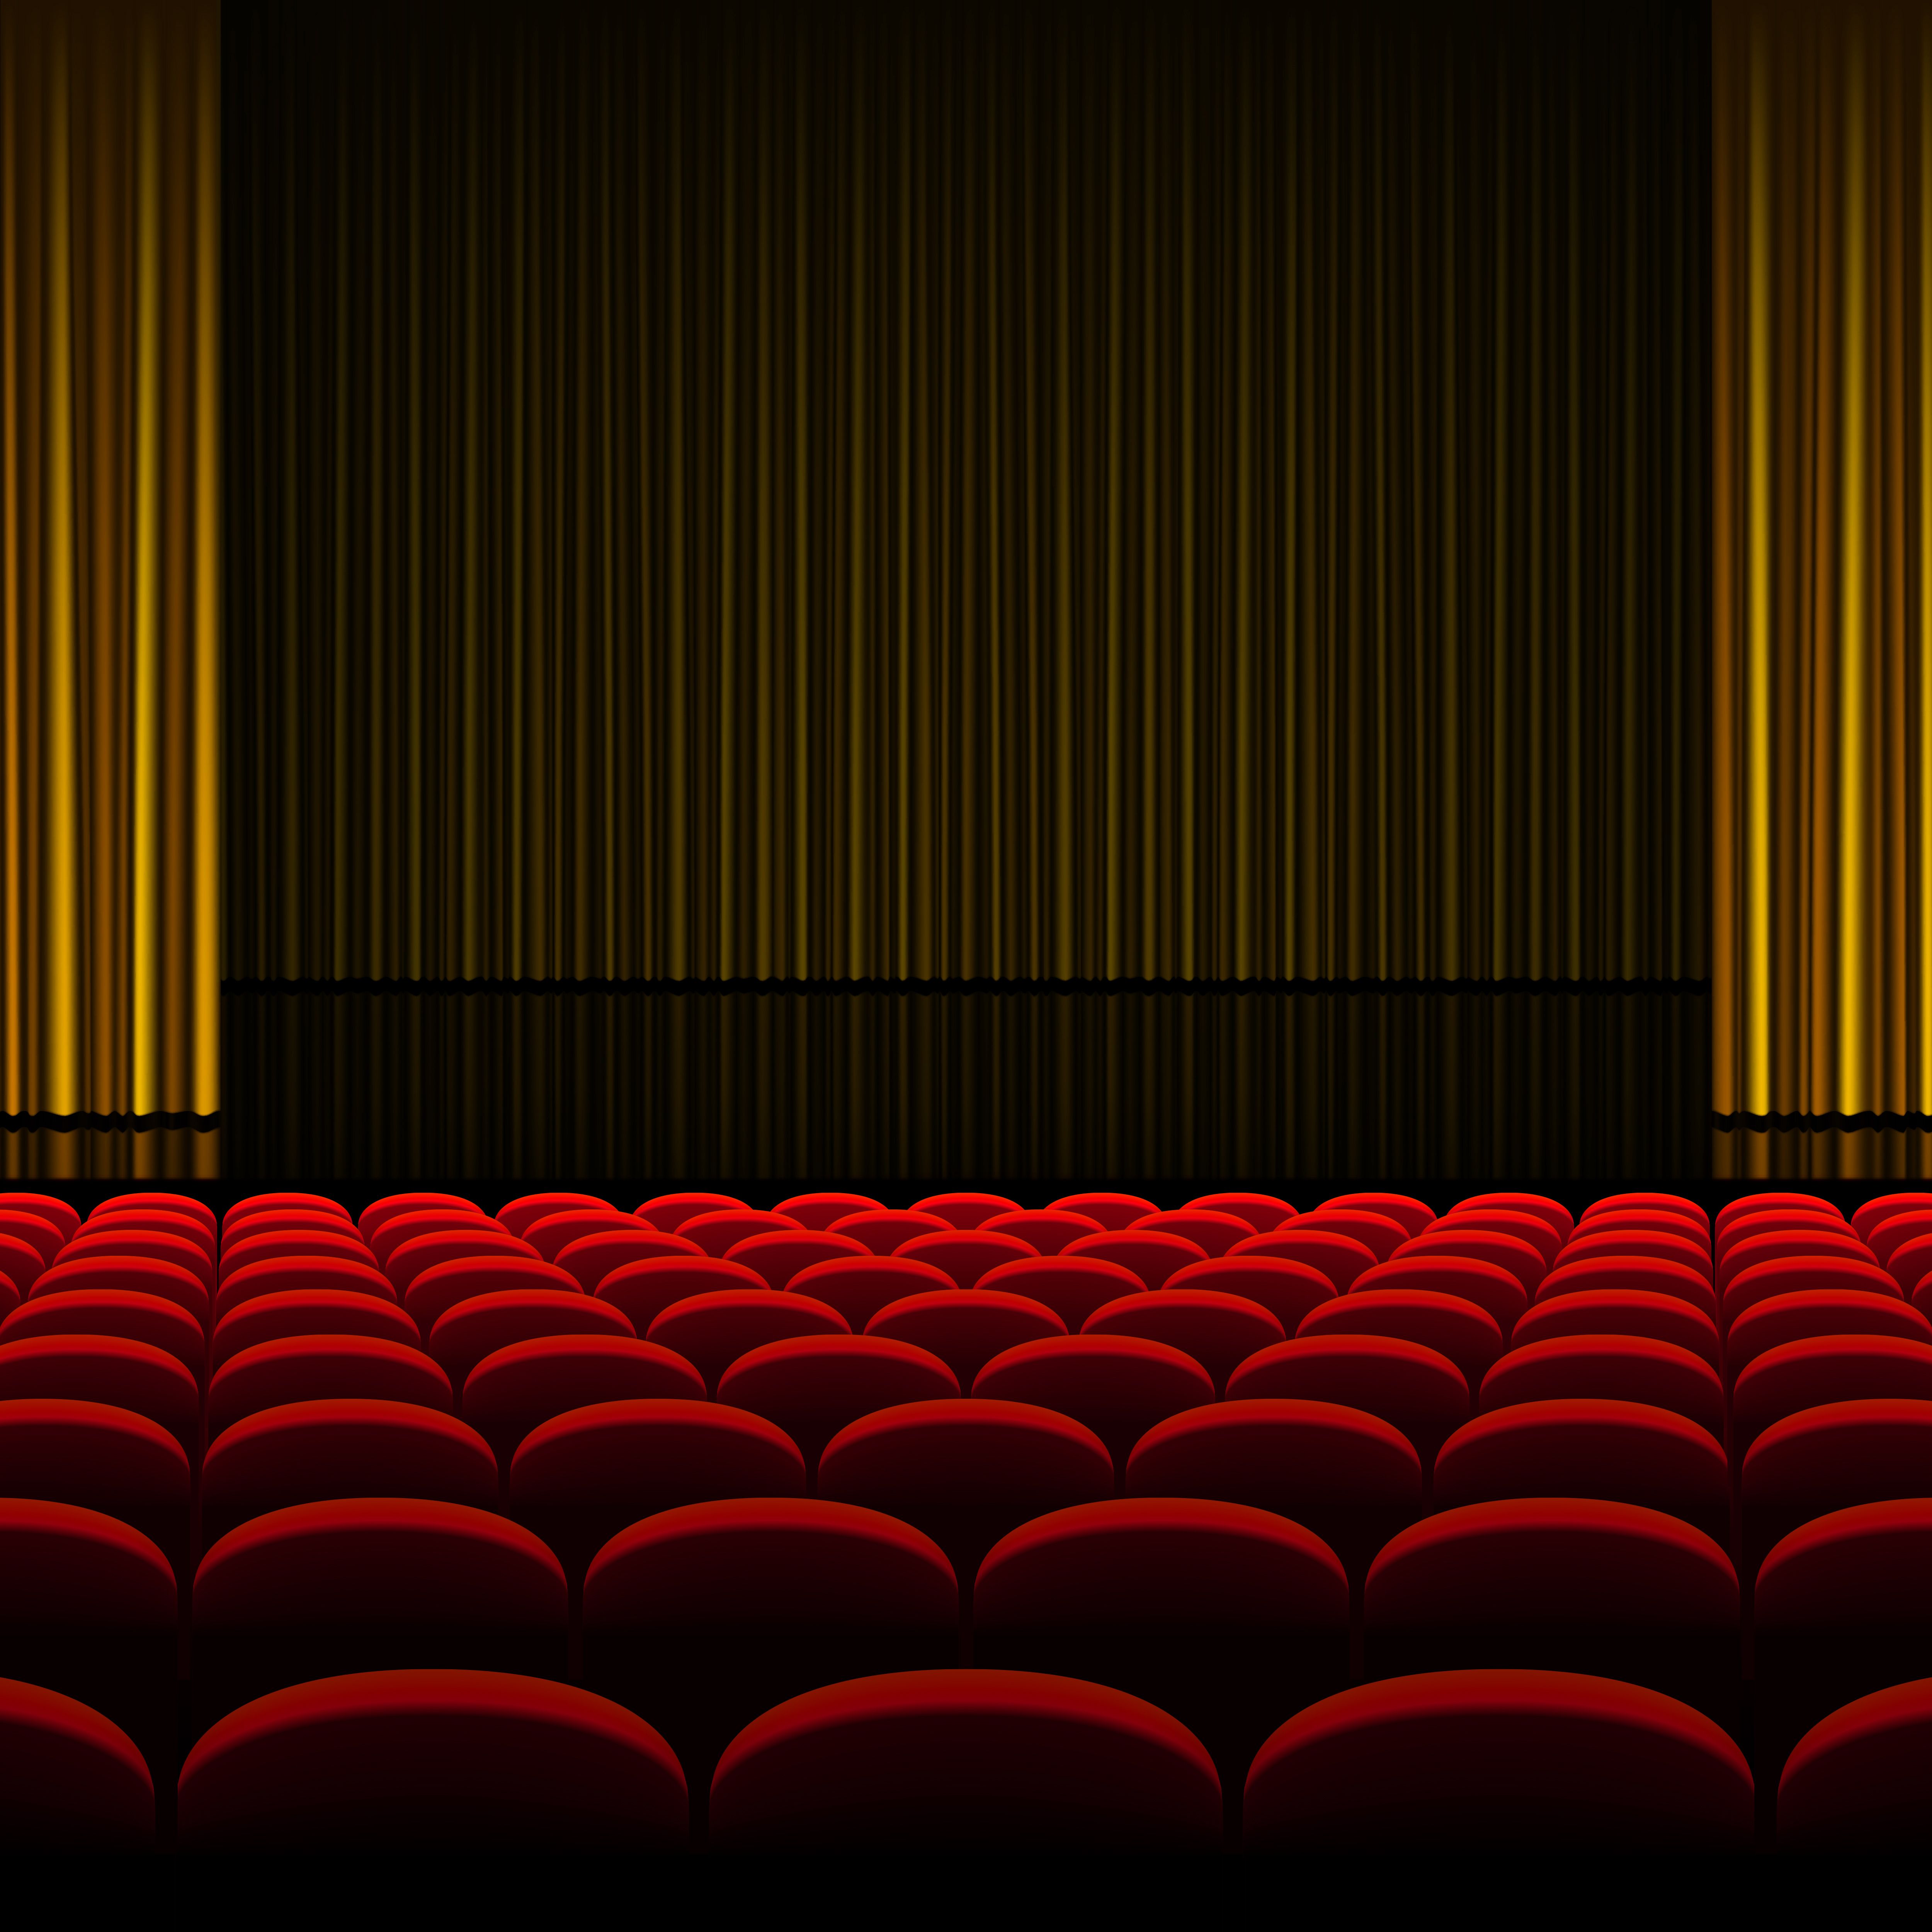 Theater Background Quality Image And Transparent PNG Free Clipart. Background, Home Cinema Room, Red Curtains